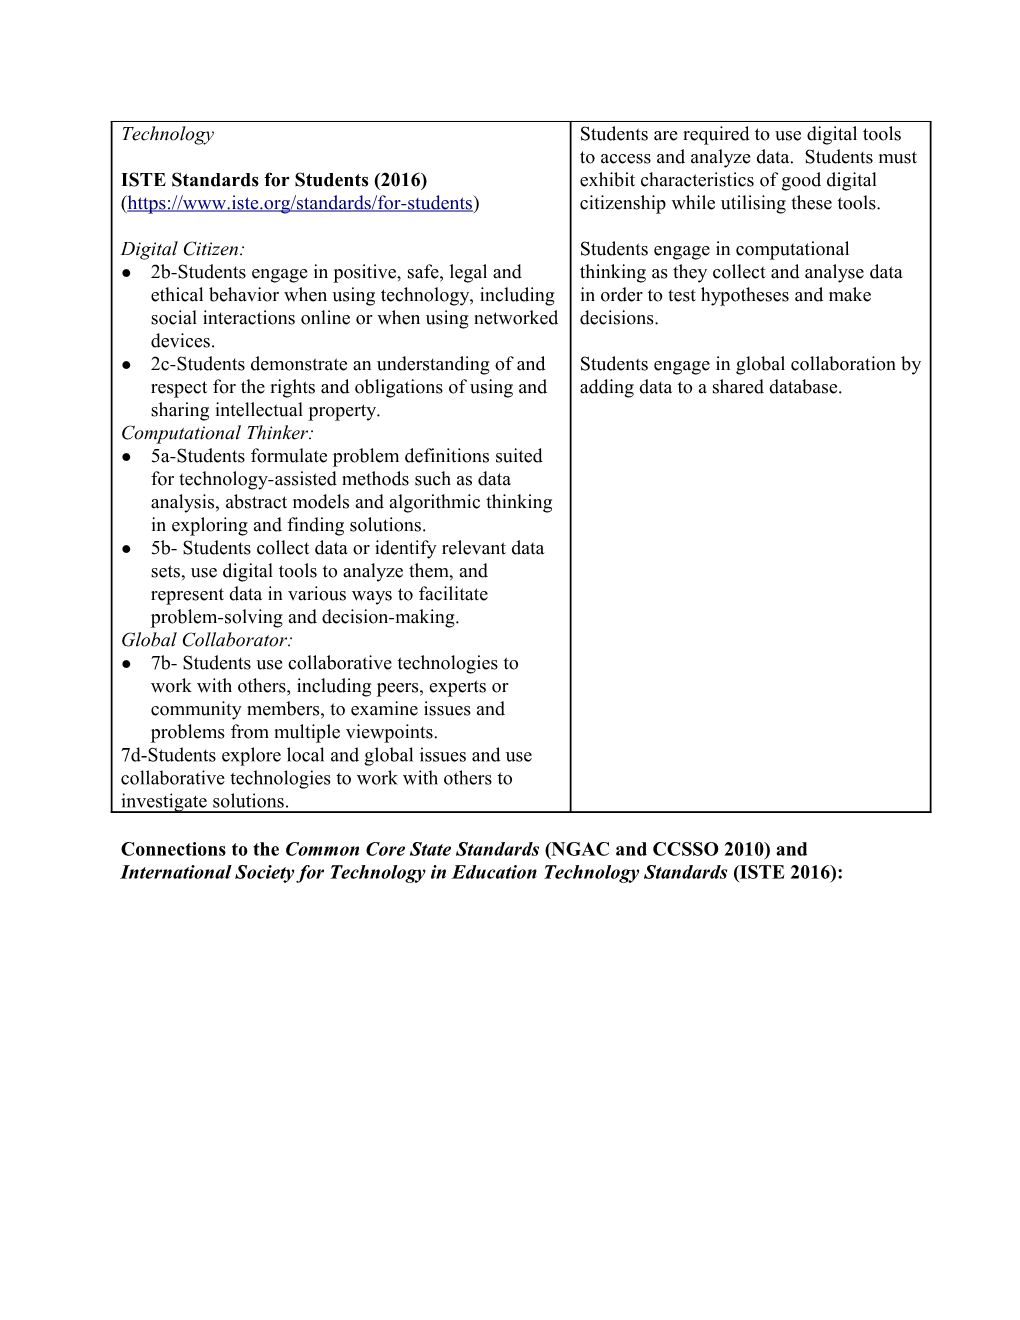 Connections to the Common Core State Standards (NGAC and CCSSO 2010) and International